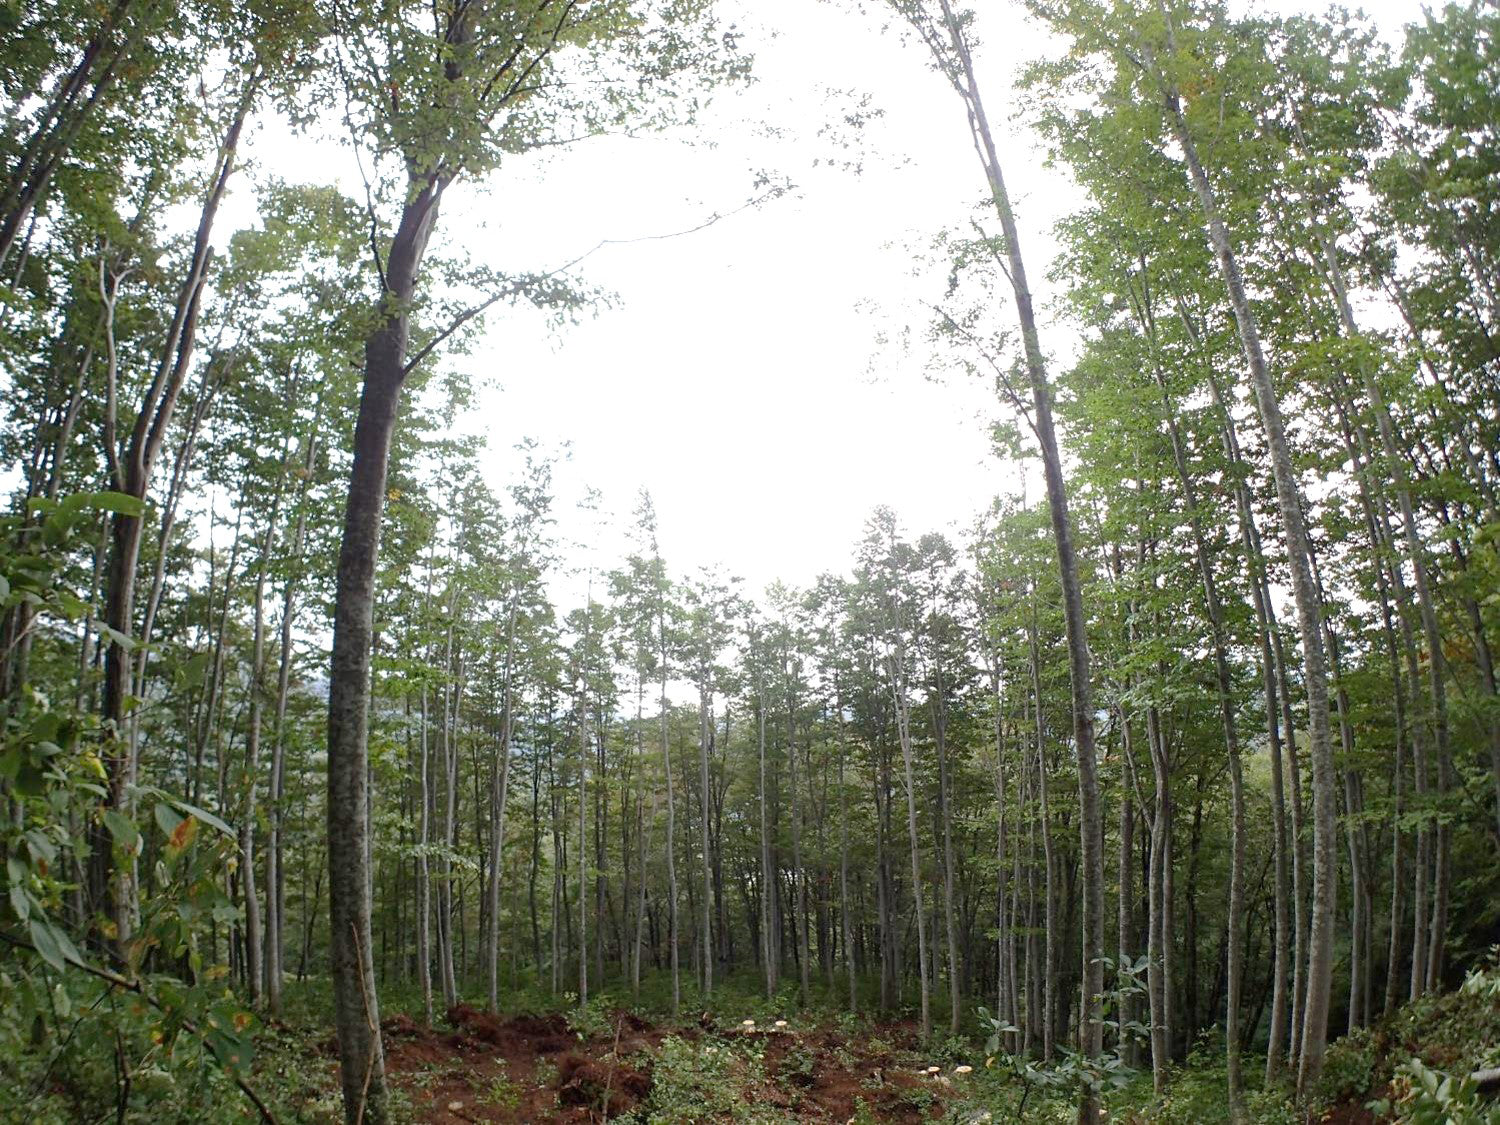 Gap after being harvested in parcel felling